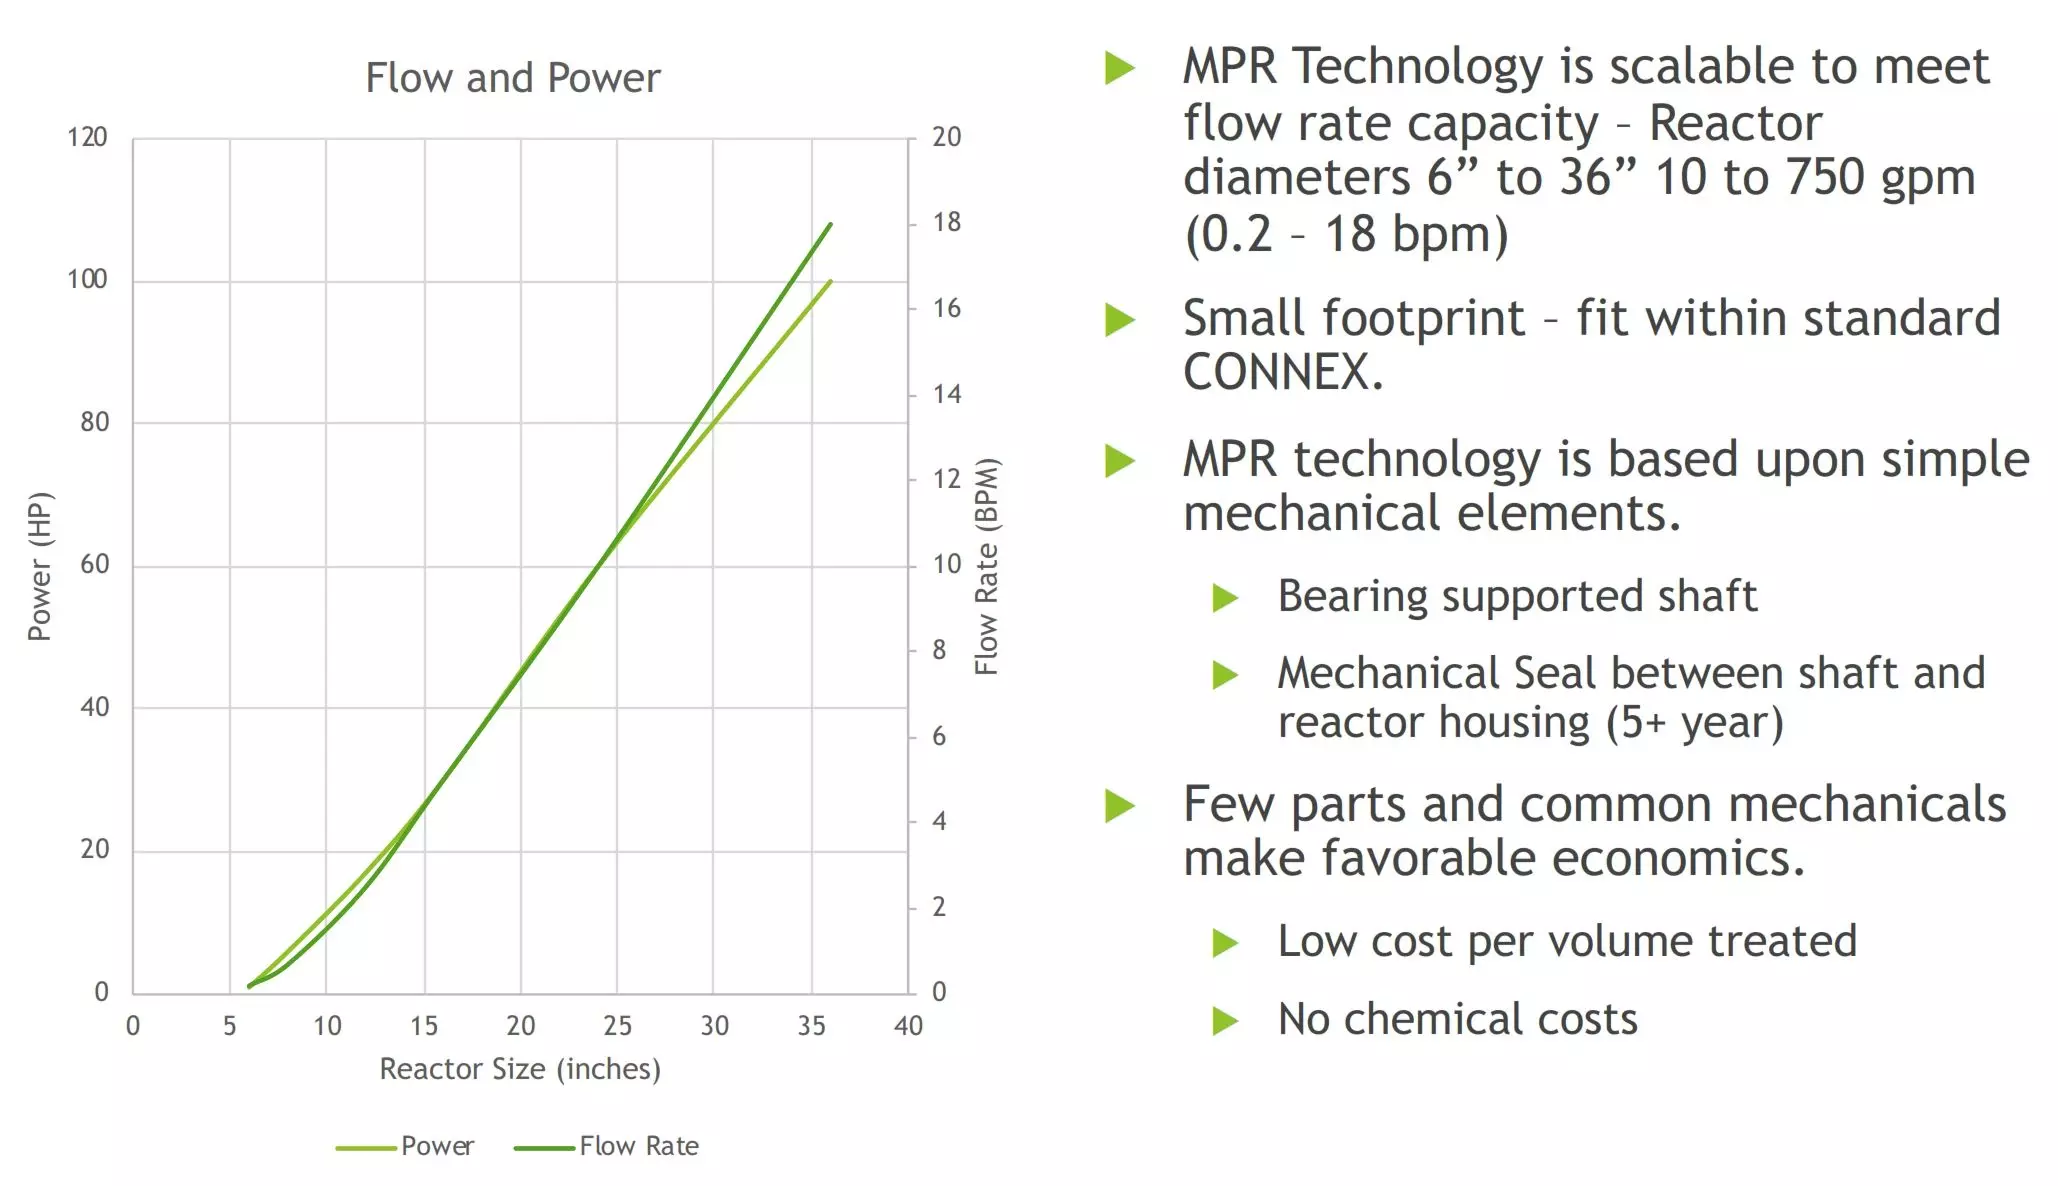 Advantages with MPR cavitation reactor